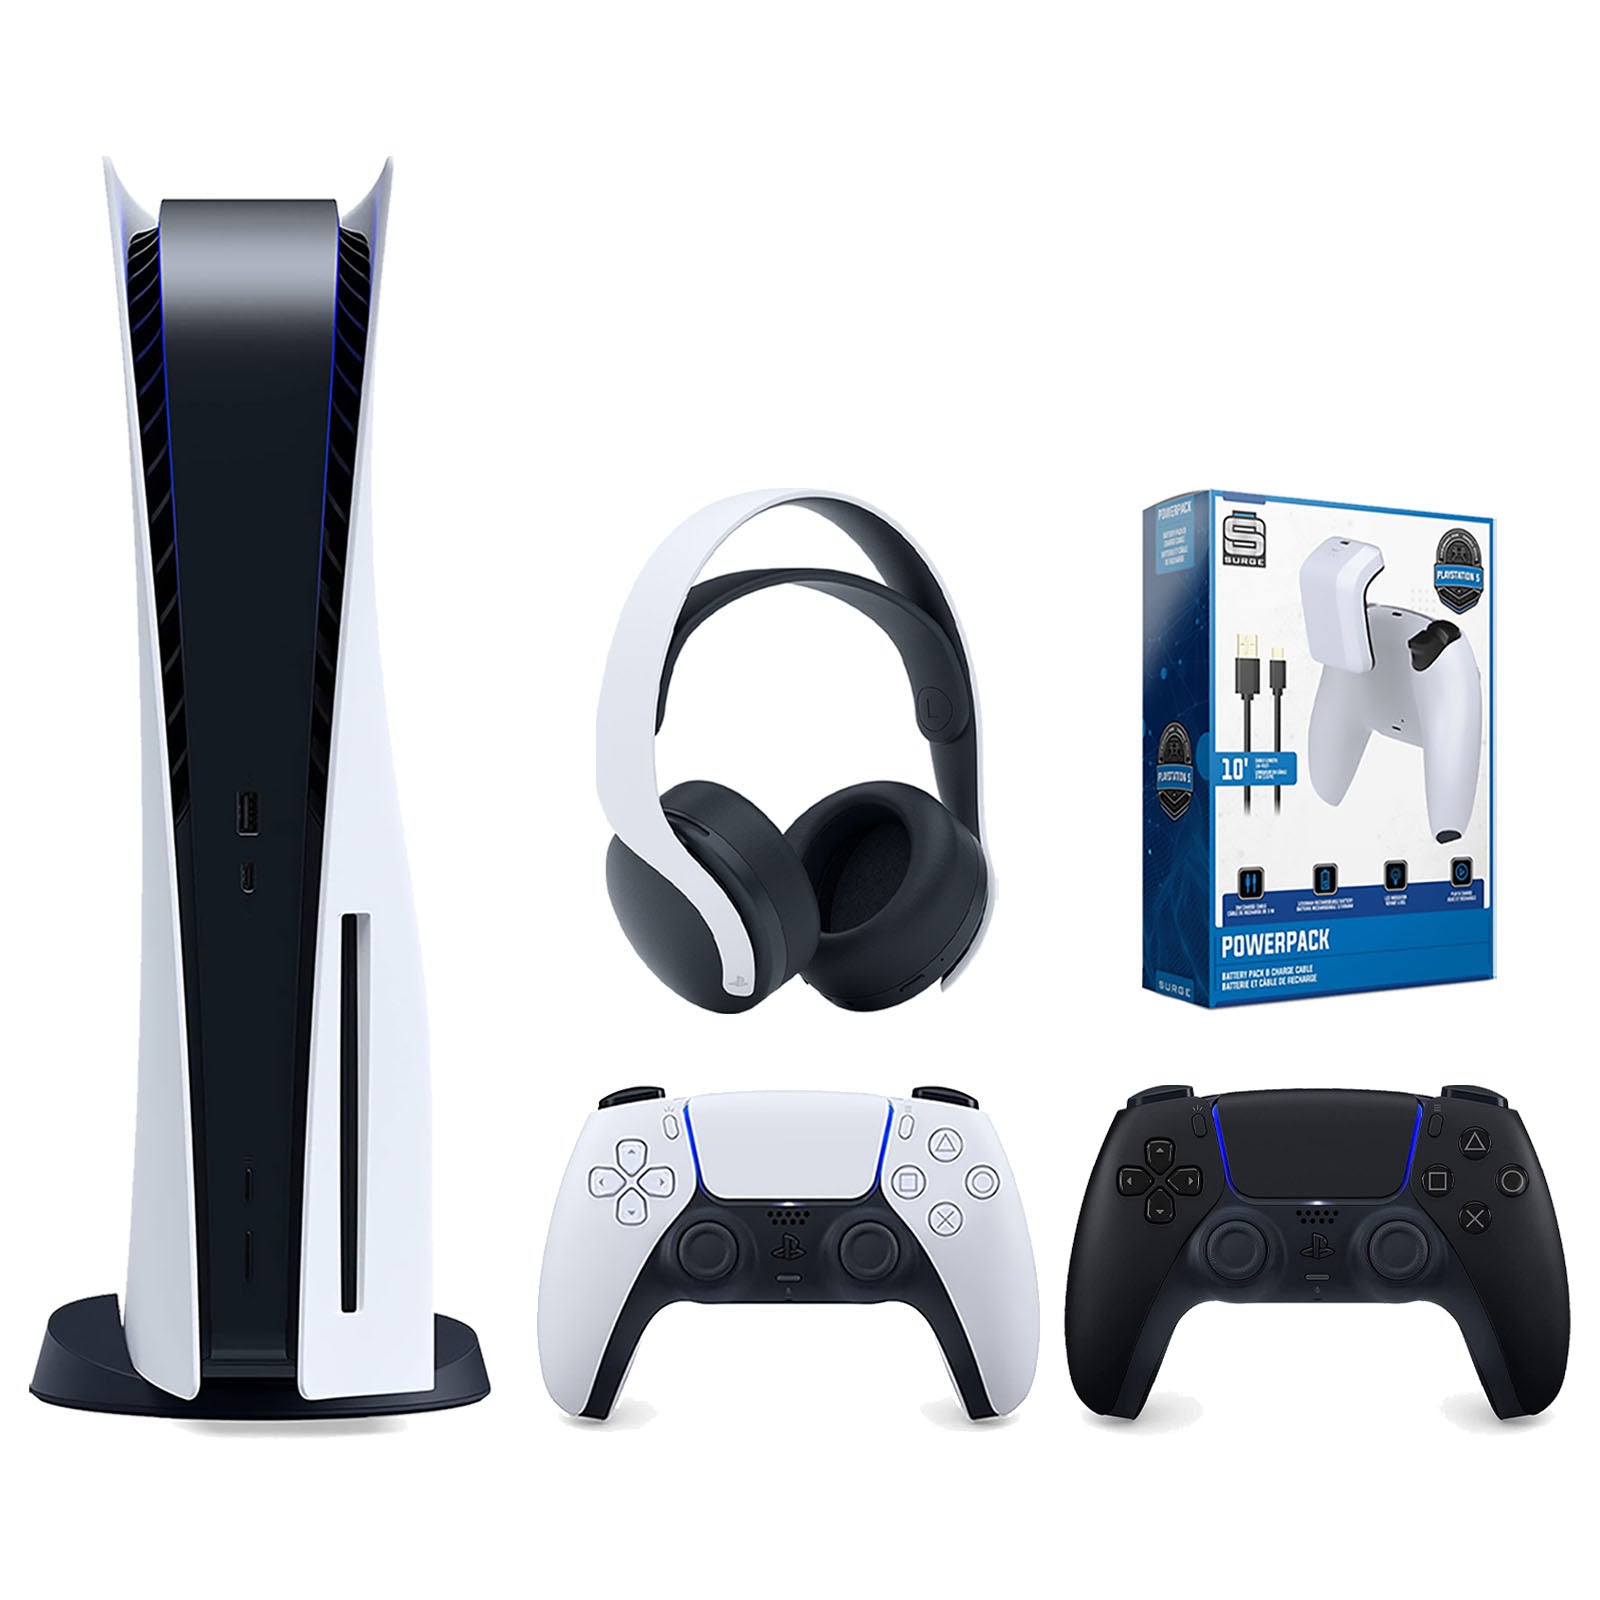 Sony Playstation 5 Disc Version Console with Extra Black Controller, White PULSE 3D Headset and Surge PowerPack Battery Pack & Charge Cable Bundle - Pro-Distributing